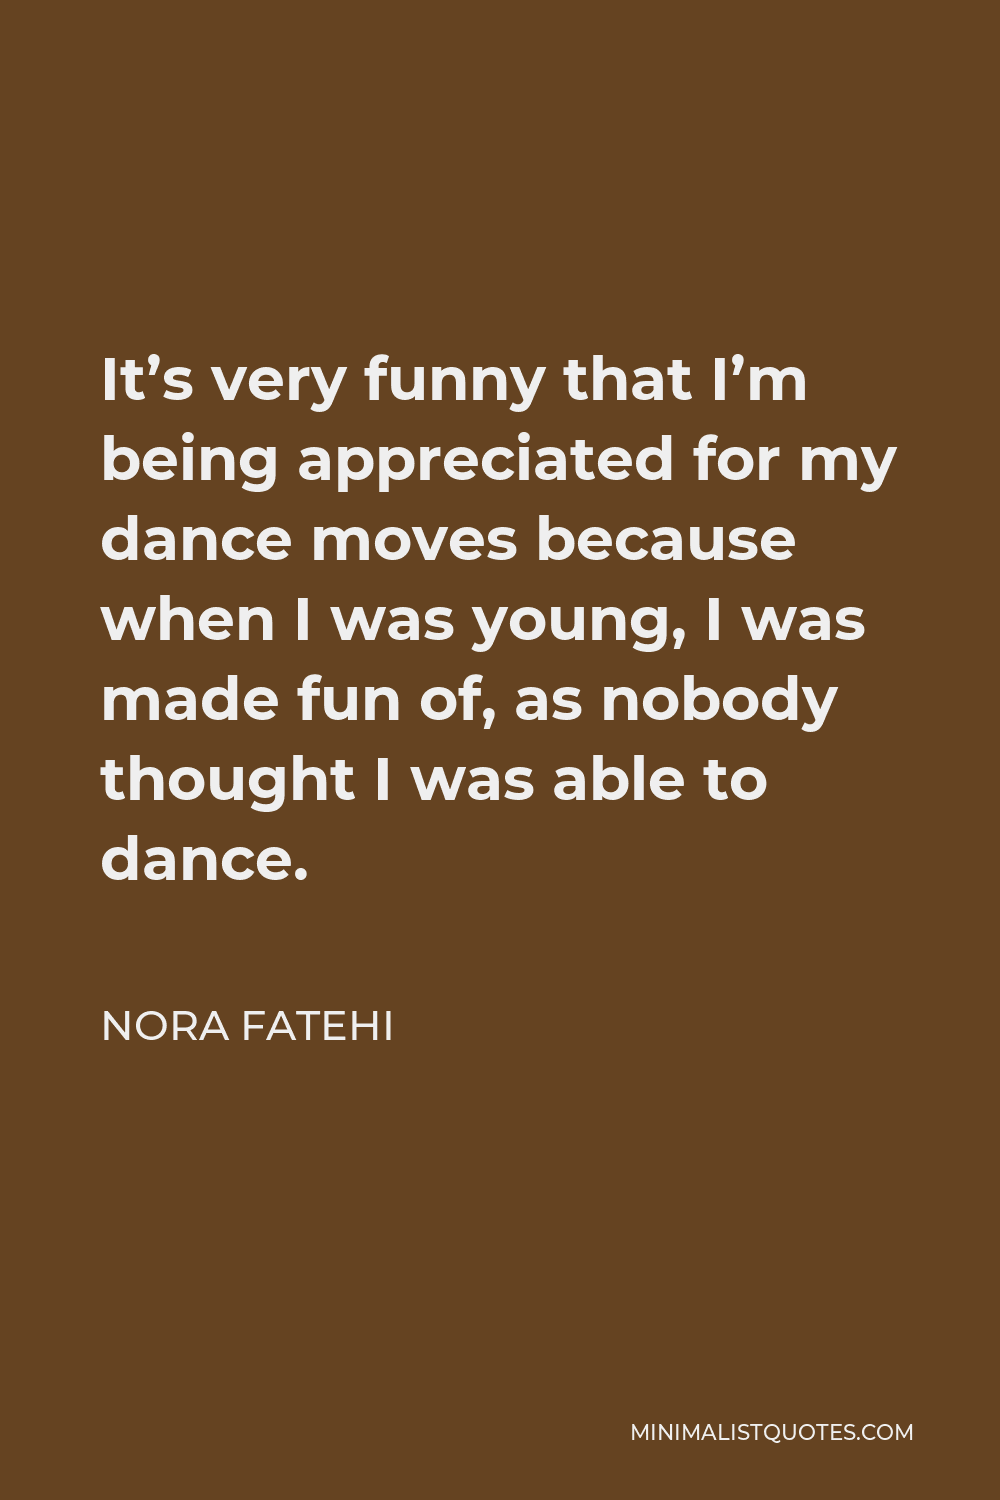 Nora Fatehi Quote - It’s very funny that I’m being appreciated for my dance moves because when I was young, I was made fun of, as nobody thought I was able to dance.